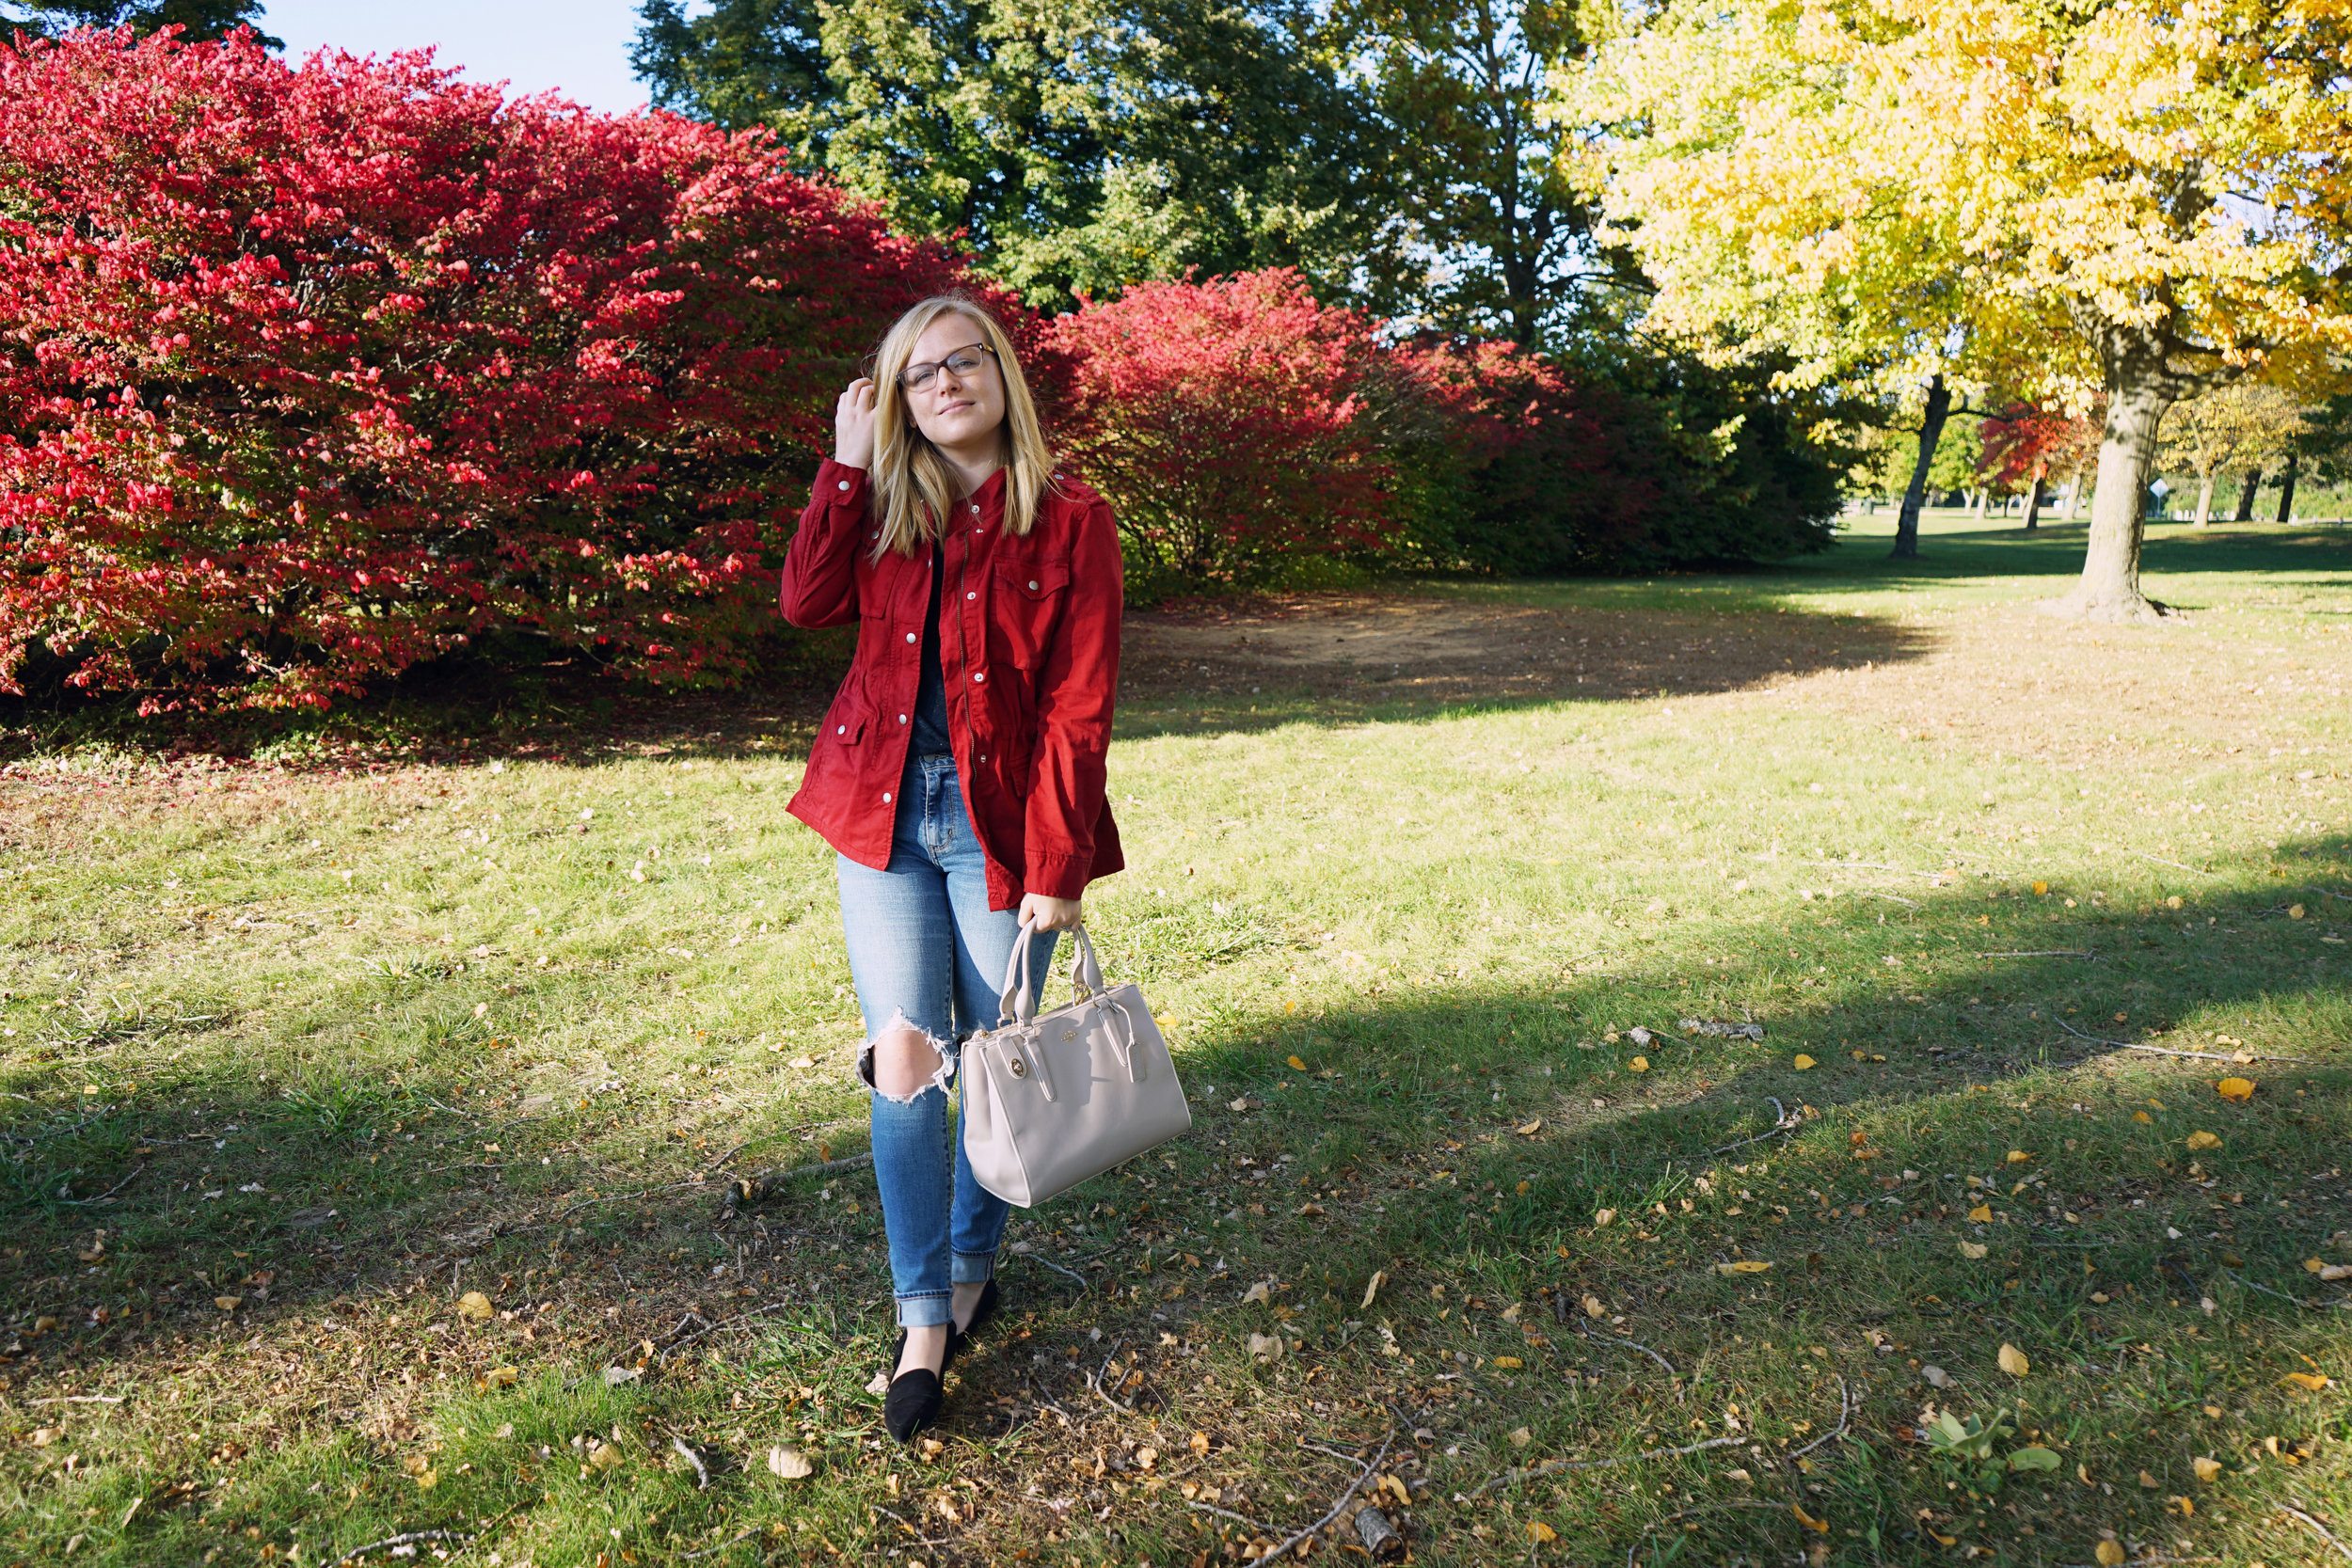 Gap classic utility jacket, Madewell whisper cotton v-neck tee, Levi's 721 High Rise distressed skinny jeans, Schutz Elise flats, Coach purse - Maggie a la Mode